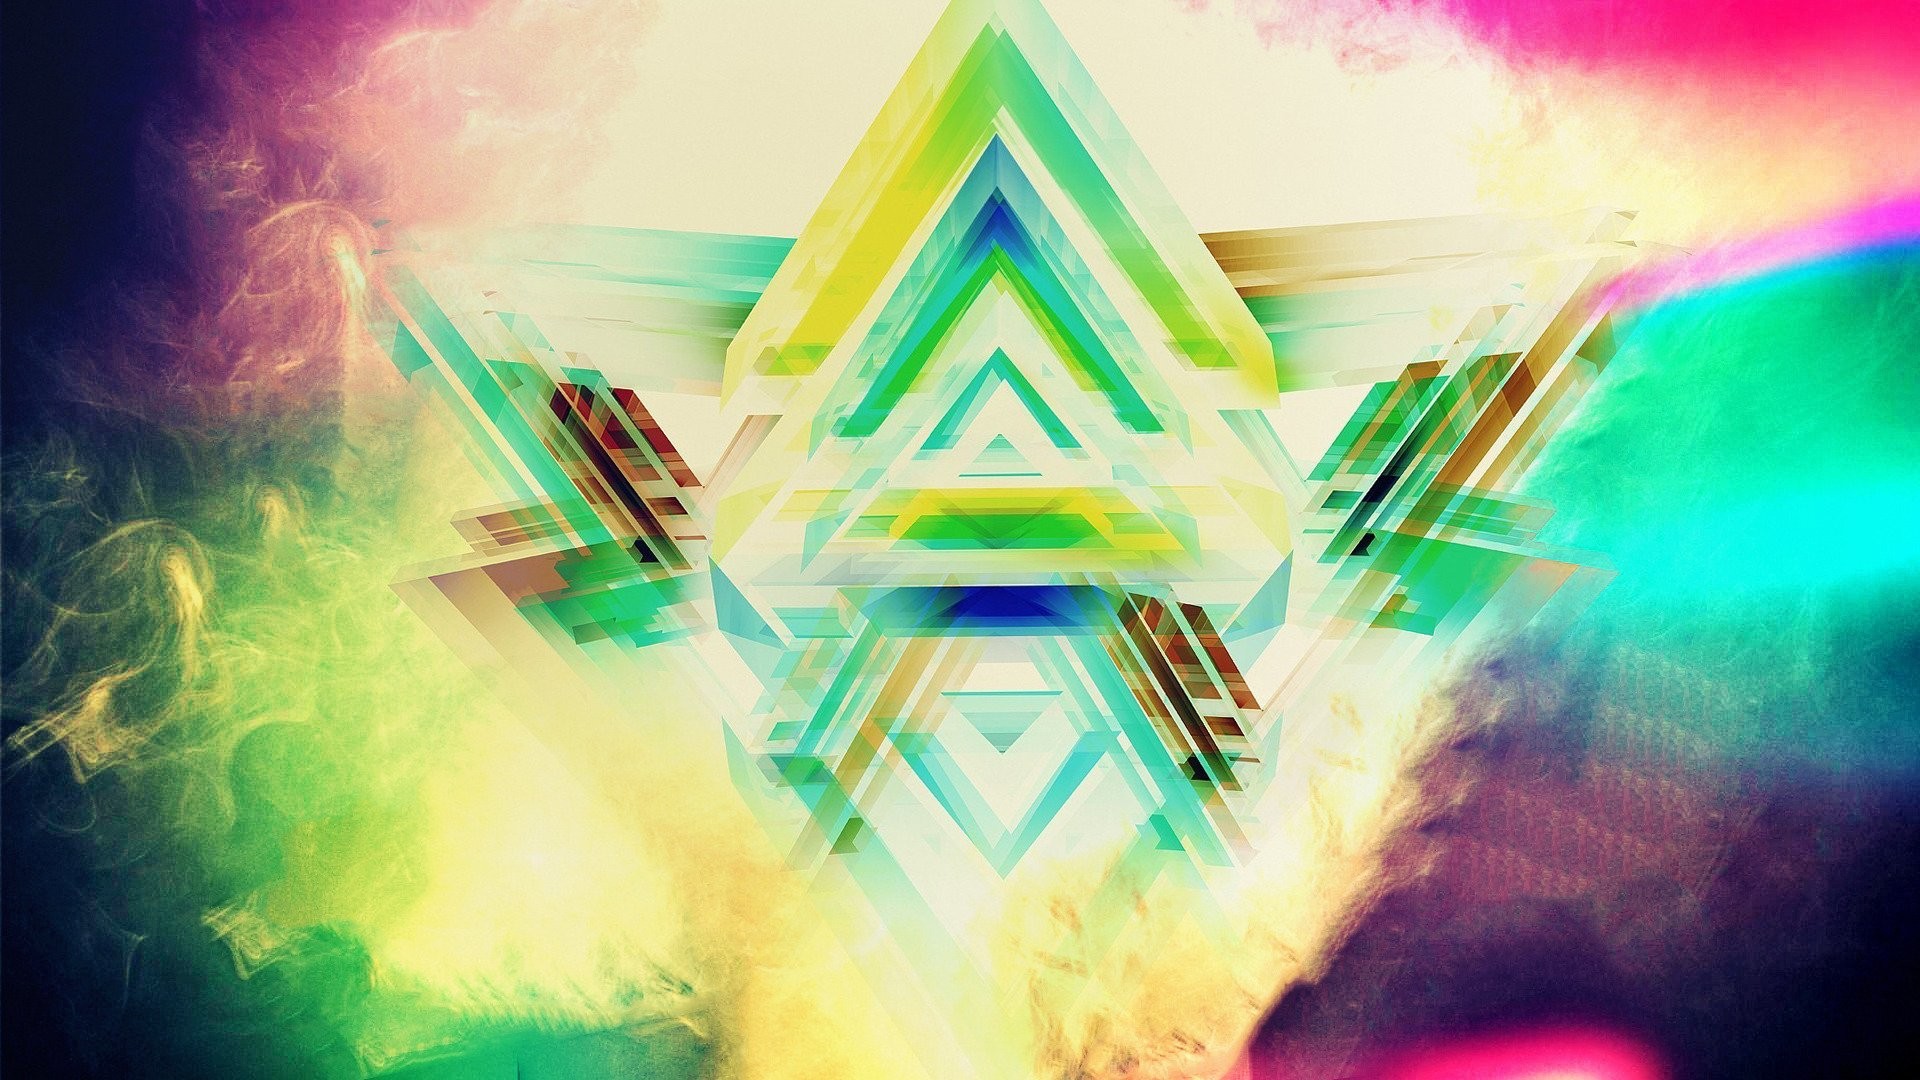 Trippy Tumblr Dope Wallpapers - We hope you enjoy our growing collection of...